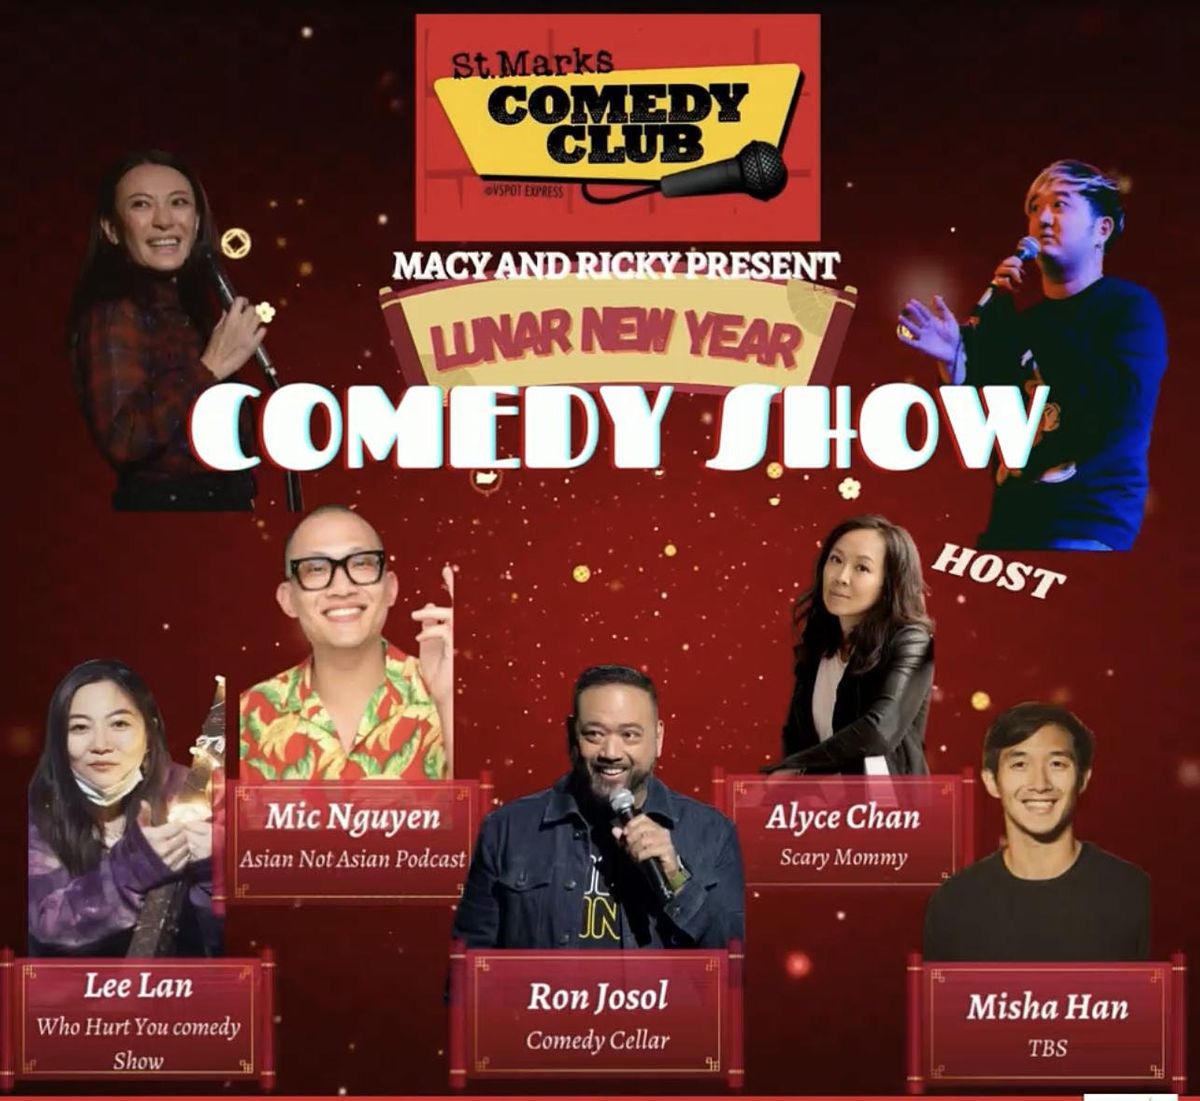 Macy and Ricky Present: NYC Lunar New Year Comedy Show